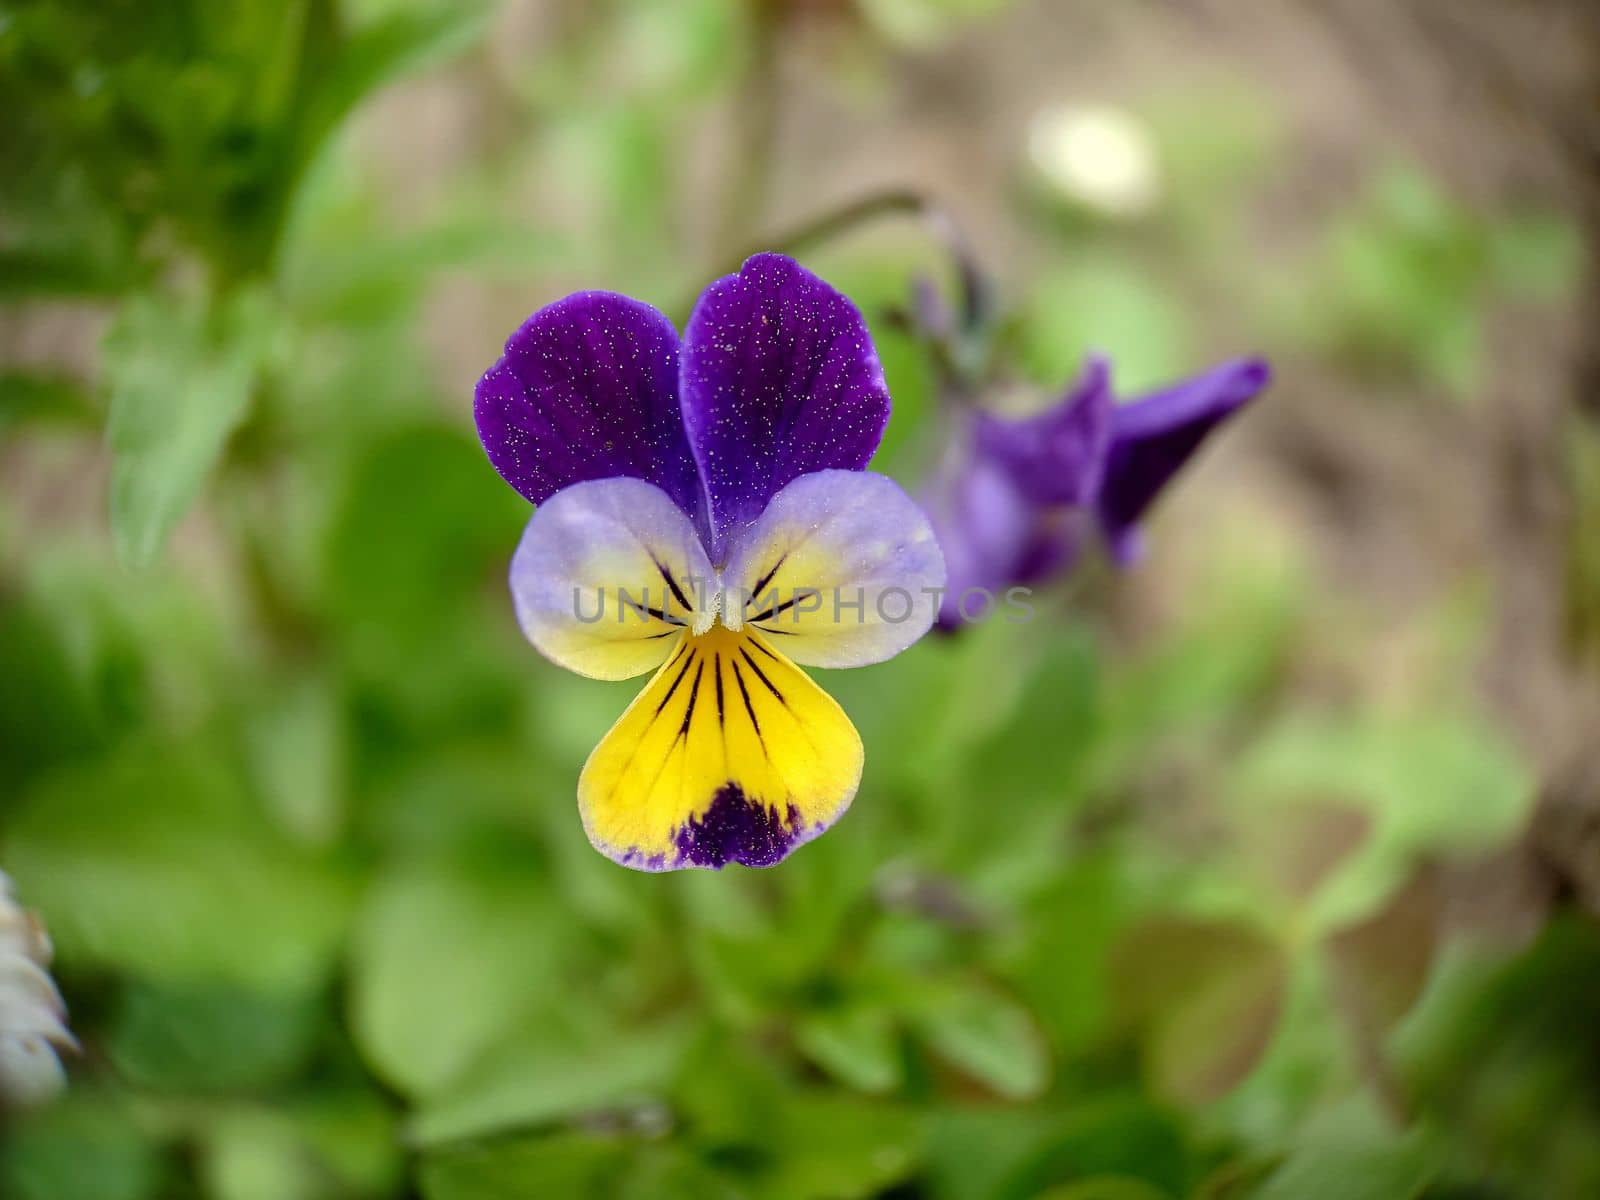 Close-up of a tricolor flower pansies on a grass background by Mastak80